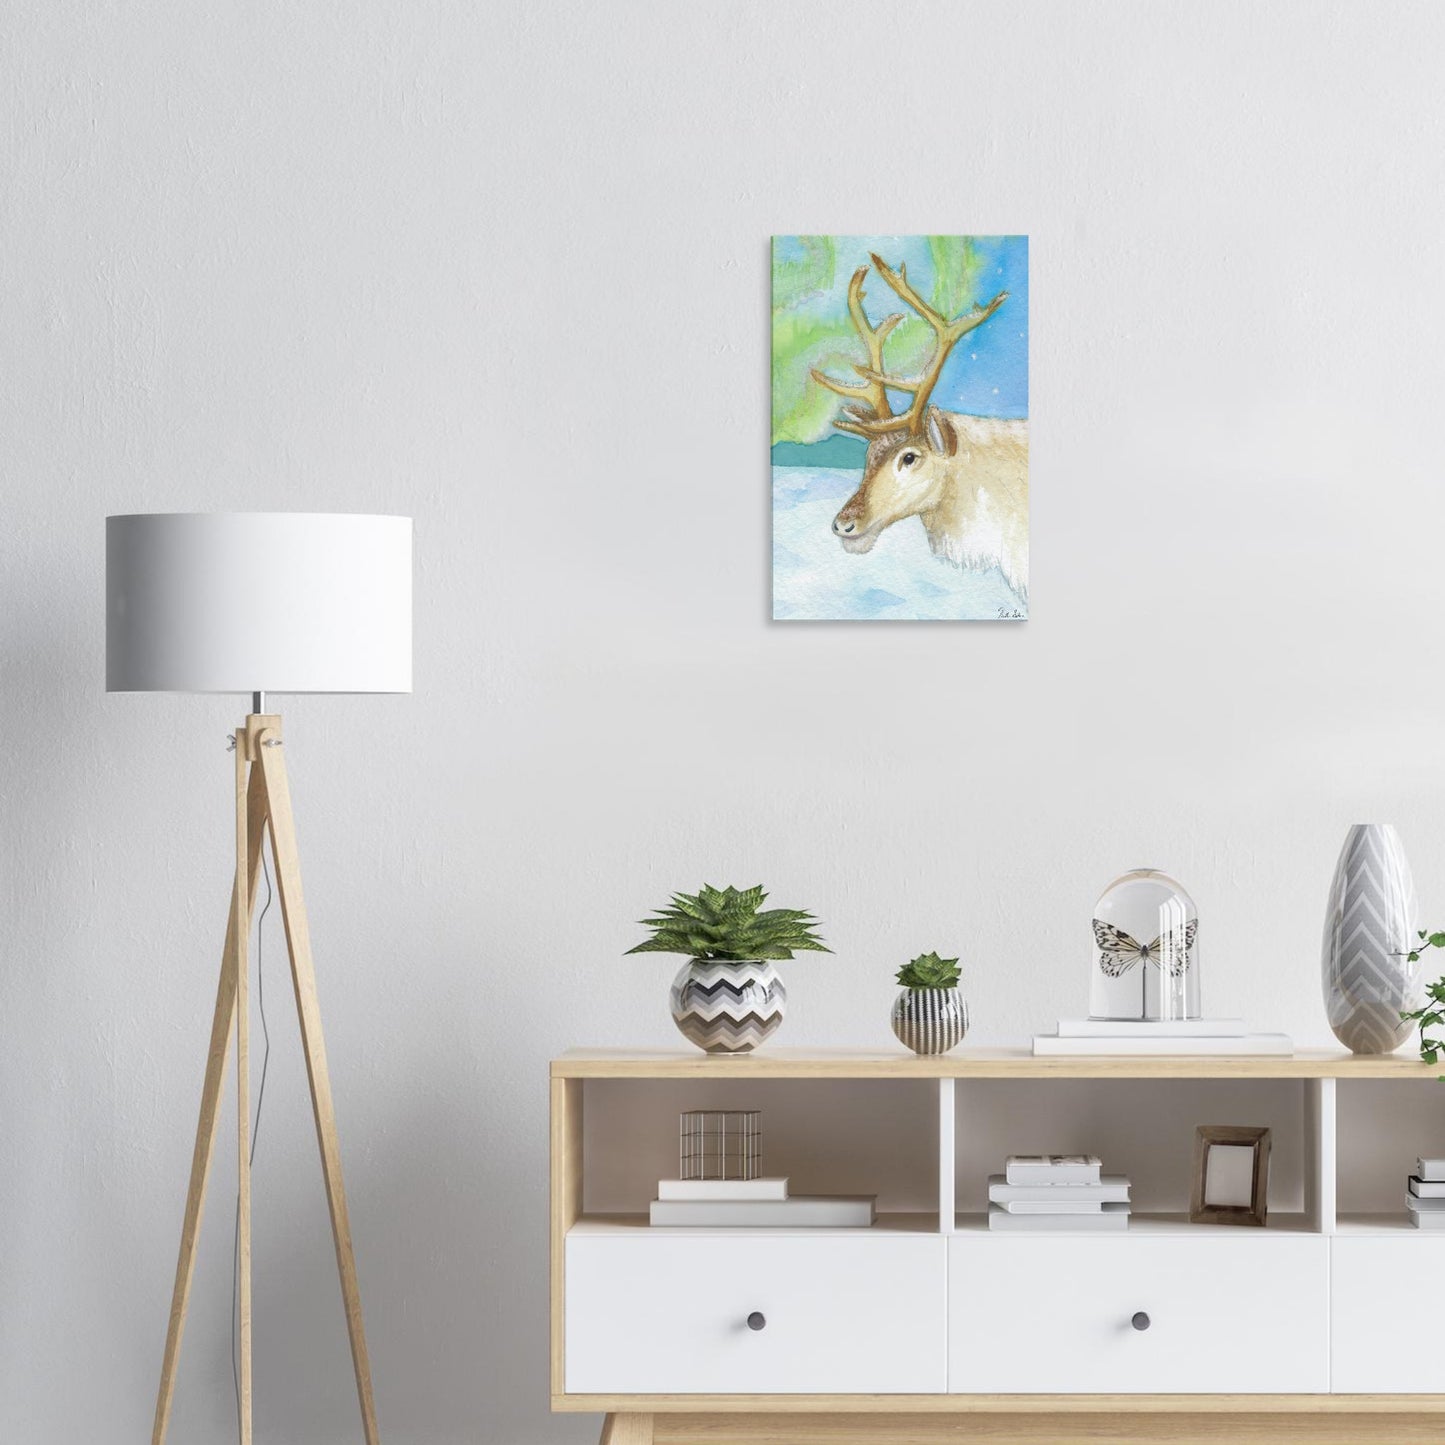 a44a98c2-f6f8-45b4-b1aa-537c697f4ab216 by 24 inch slim canvas print of Heather Silver's watercolor painting, northern lights reindeer. Shown on wall above shelves with potted plants and a lamp.